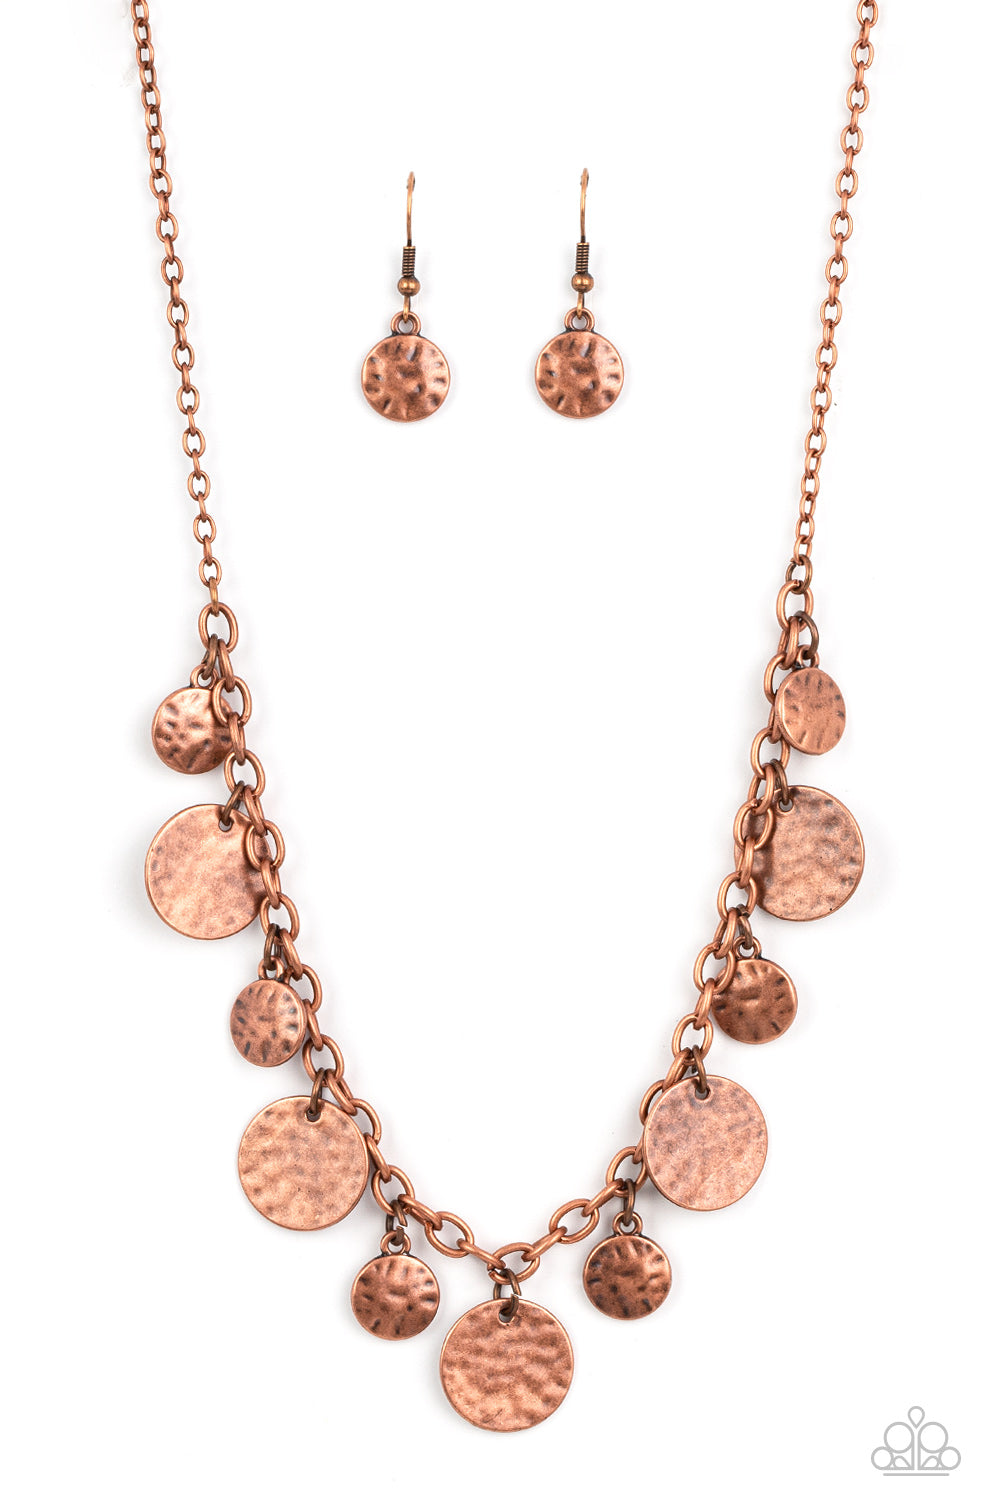 Model Medallions Paparazzi Accessories Necklace with Earrings Copper